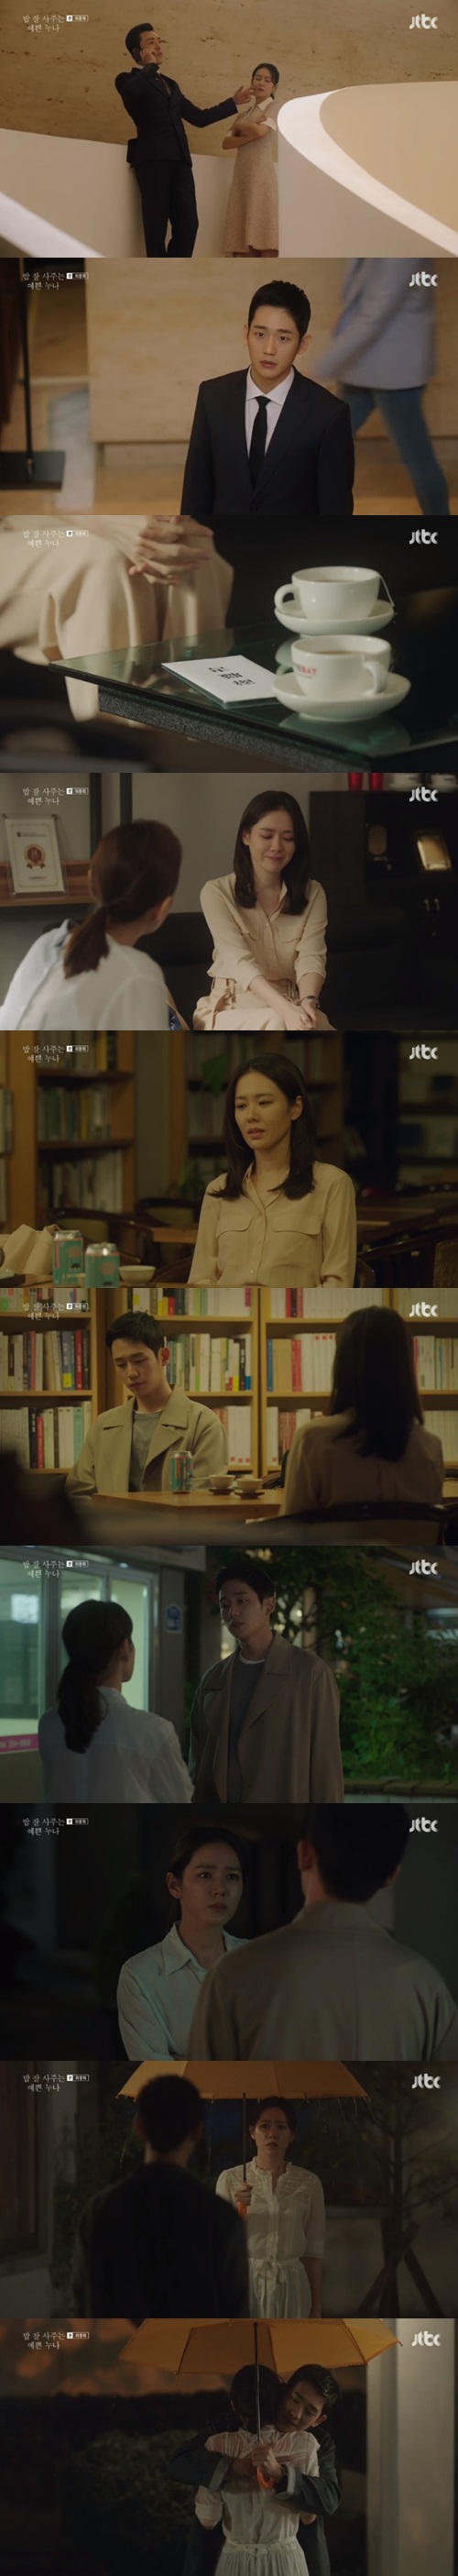 Happy Endings of Son Ye-jin Jung Hae In bought the audiences voice because of the frustrating process.JTBCs Golden Earth Drama, The Pretty Sister Who Buys Bob Good broadcast on May 19 (Last episode/The Playwright Kim Eun/Director An Pan-seok), Yon Jin-ah (Son Ye-jin) and Seo Jun-hee (Jung Hae In) reunited with Jeju Island.Earlier, the love of Yoon Jin-ah Seo Jun-hee was in crisis due to the opposition of Yoon Jin-ah mother Kim Miyeon (Gil Hae-yeon).Kim Miyeon kicked out his disapproving love daughter from the house, and Seo Jun-hee said he wanted to live with Yon Jin-ah because he was worried that he would live alone, but Yoon Jin-ah refused.So Seo Jun-hee asked Yoon Jin-ah to leave together after applying for the United States of America dispatch.Yoon Jin-ah has been relegated from the head office to the factory manager due to the in-house sexual harassment incident.Yoon Jin-ah refused to follow Seo Jun-hee in such a situation, believing that going to United States of America was a runaway.Following the move of Yon Jin-ah secretly to Seo Jun-hee, the two separated, refusing to go to United States of America, and a few years later they reunited at the marriage ceremony of Yoon Seung-ho (who was here to help).Seo Jun-hee came to see Yoon Seung-ho despite not inviting him, and Yoon Jin-ah and Seo Jun-hee turned away even when they knew that they had forgotten each other as soon as they saw each other again.The new lover who was near Yon Jin-ah was the biggest reason, but the two of them came back by chance at a cafe in Seo Kyung-sun (Seo Yeon-yeon).Yoon Jin-ah said to stay the same as before but Seo Jun-hee was furious.The argument was repeated as Seo Jun-hee went to Yoon Jin-ahs house and Yoon Jin-ah went to Seo Jun-hees house.Meanwhile, Yoon Jin-ah gave his resignation to Jung Young-in (Seo Jeong-yeon) and made a dogmatic decision to help Jeju Island cafe work as advised by Geum Bo-ra (Resident Kyung).When Yoon Jin-ah declared Jeju Island, his mother Kim Miyeon (Gil Hae-yeon) apologized for the past with tears.Later, Seo Jun-hee, who was about to leave the country after vacation, heard the love confession voice left by Yon Jin-ah in the past and went back to Yon Jin-ah, and found out that Yoon Jin-ah had left for Jeju Island.Yoon Jin-ah, who had told Geum Bo-ra about Seo Jun-hee until the last minute, Our relationship was there, was released by the apology of Seo Jun-hees I was all wrong.Seo Jun-hee and Yoon Jin-ah reunited in the rain once again and painted Happy Endings in a love affair that led to a kiss in a hug.Before becoming a lover, the red umbrella that the two people were using was a green umbrella during love, and in the final reunion ending, it turned into a yellow umbrella, which made them guess that they would have a different love.Clearly Happy Endings, but the process was frustrating: See Jun-hee and Yoon Jin-ah, who met again, were again mixed and fought.The reminiscence scene that revived the past was a hindrance to the development.In addition, while Yoon Jin-ah met someone other than Seo Jun-hee, left the company where Nam Ho-gyun (Park Hyeok-kwon) and Gong Cheol-gu (Lee Hwa-ryong) remained, and refused to go to Seo Jun-hee and United States of America, the appearance of Geum Bo-ra and Jeju accepting the heroine character without understanding. I made it into a street.Yoo Gyeong-sang